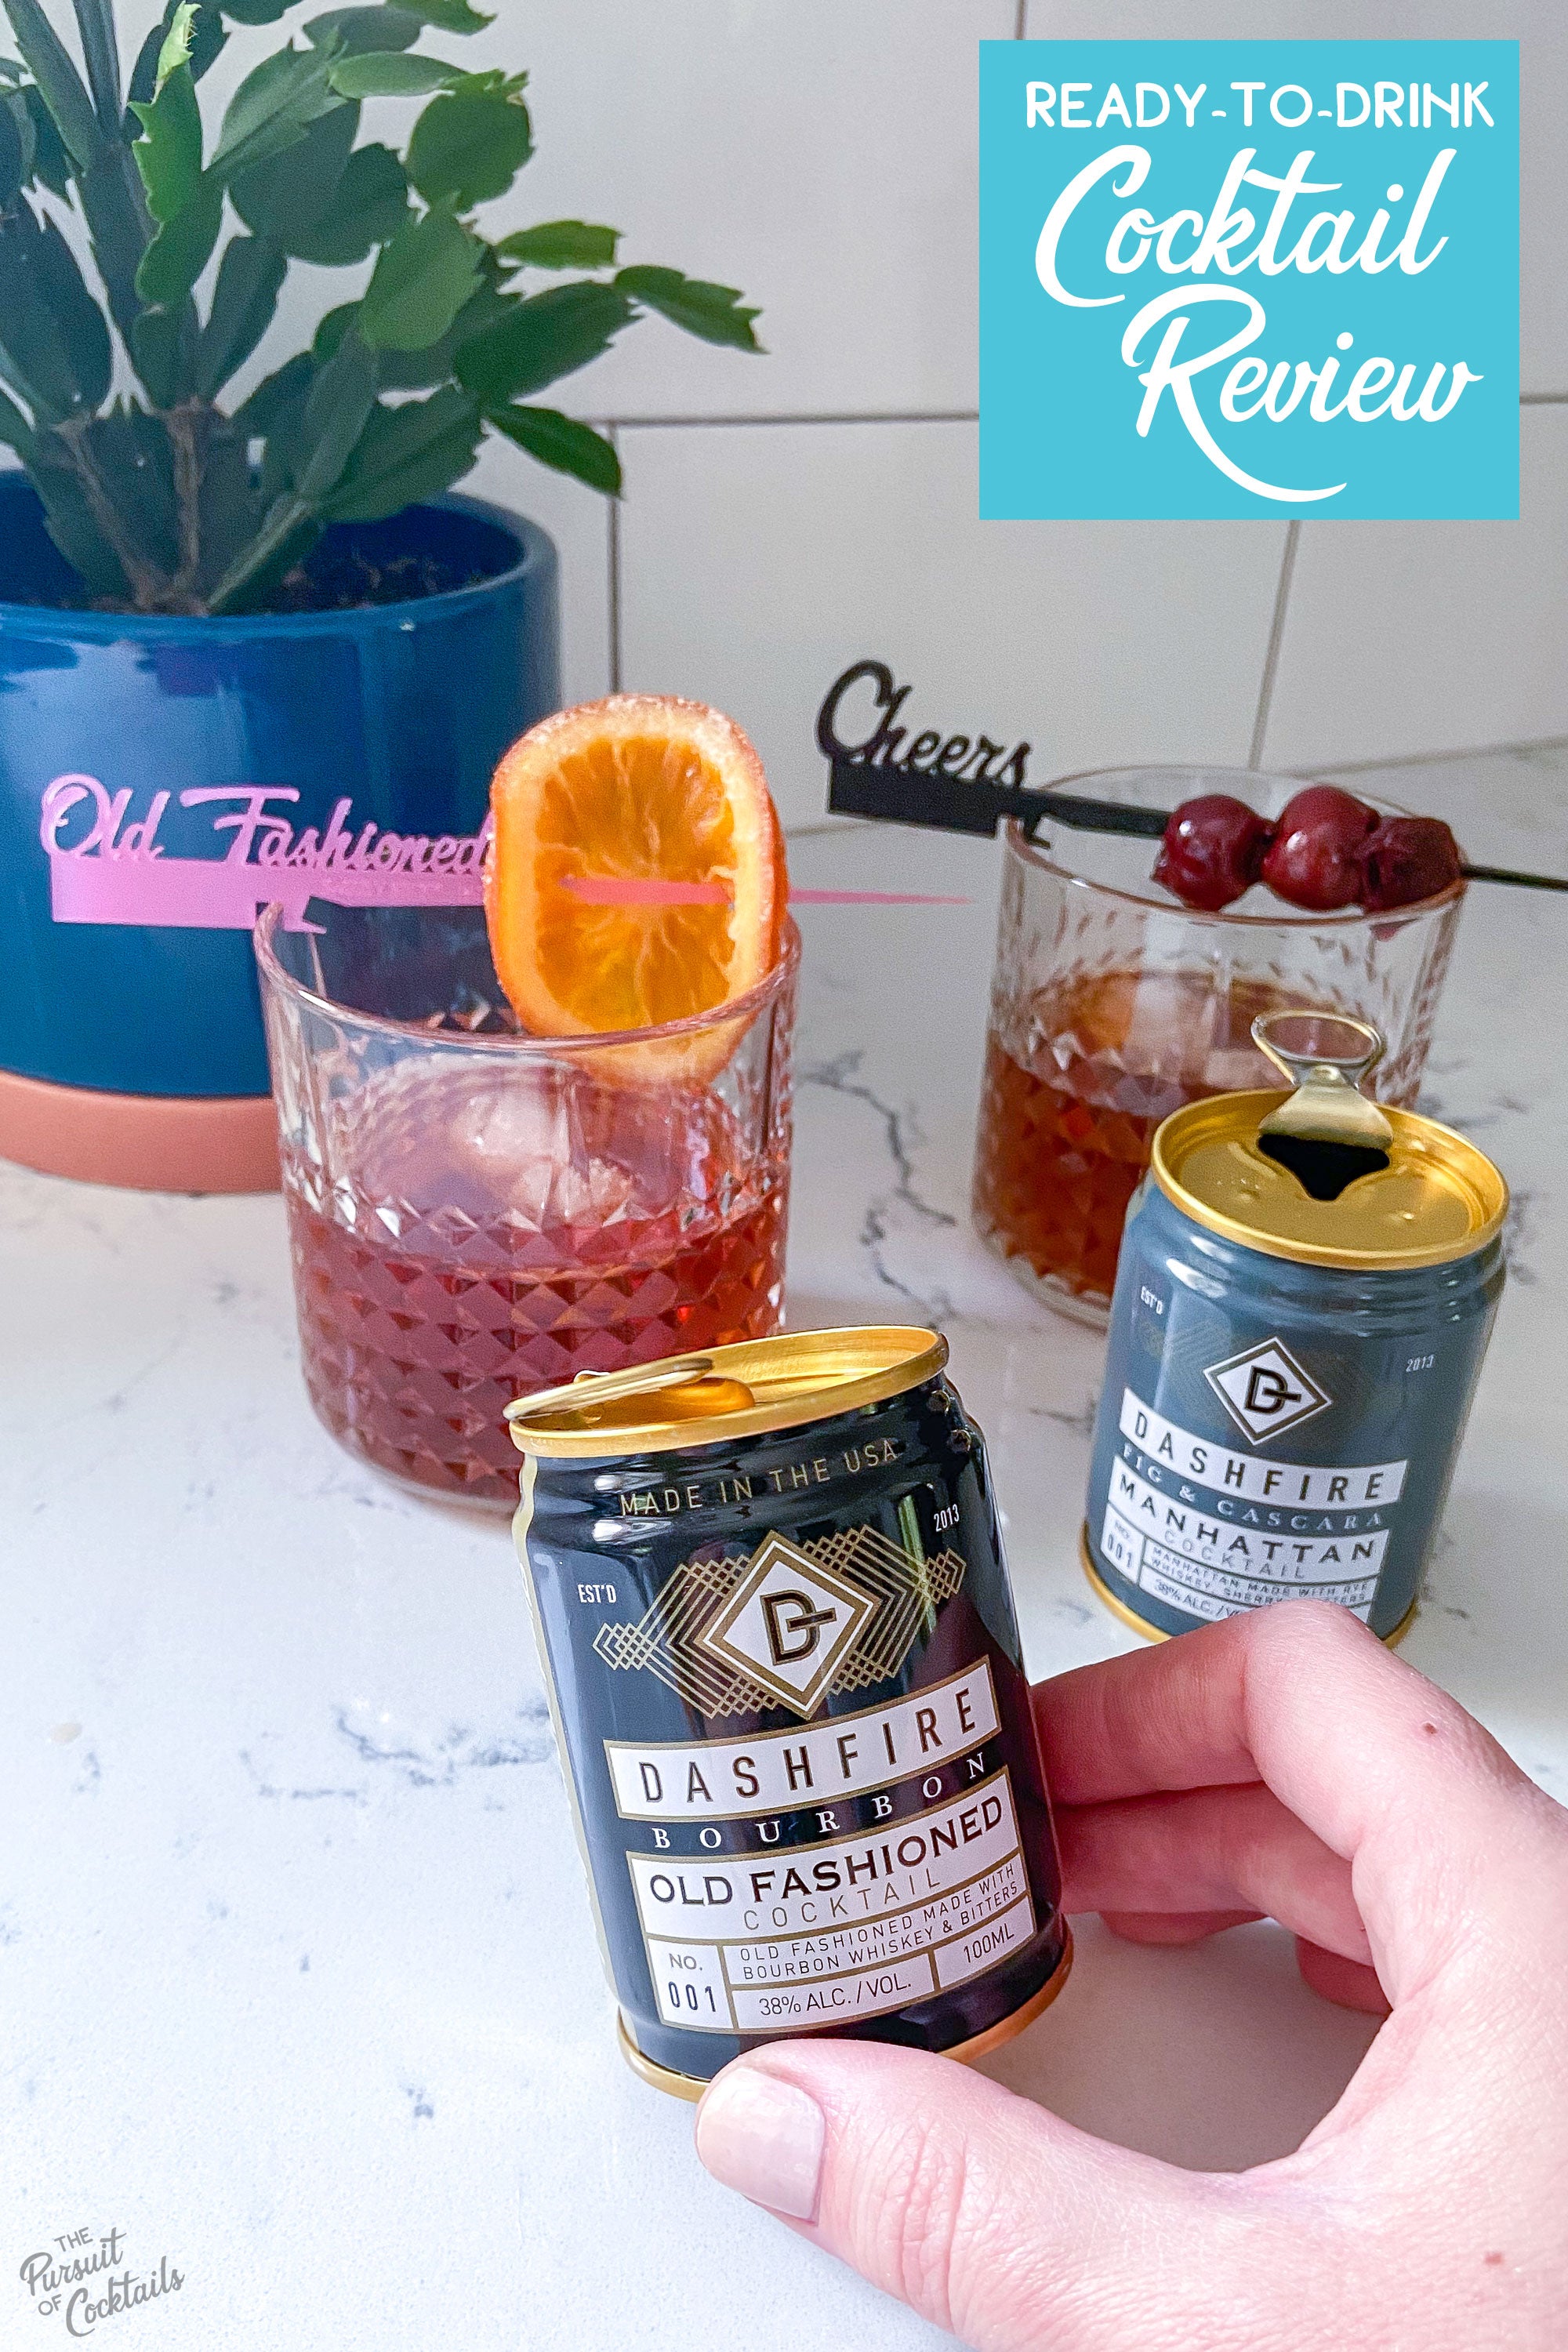 Dashfire Old Fashioned and Manhattan canned cocktail reviewed by The Pursuit of Cocktails